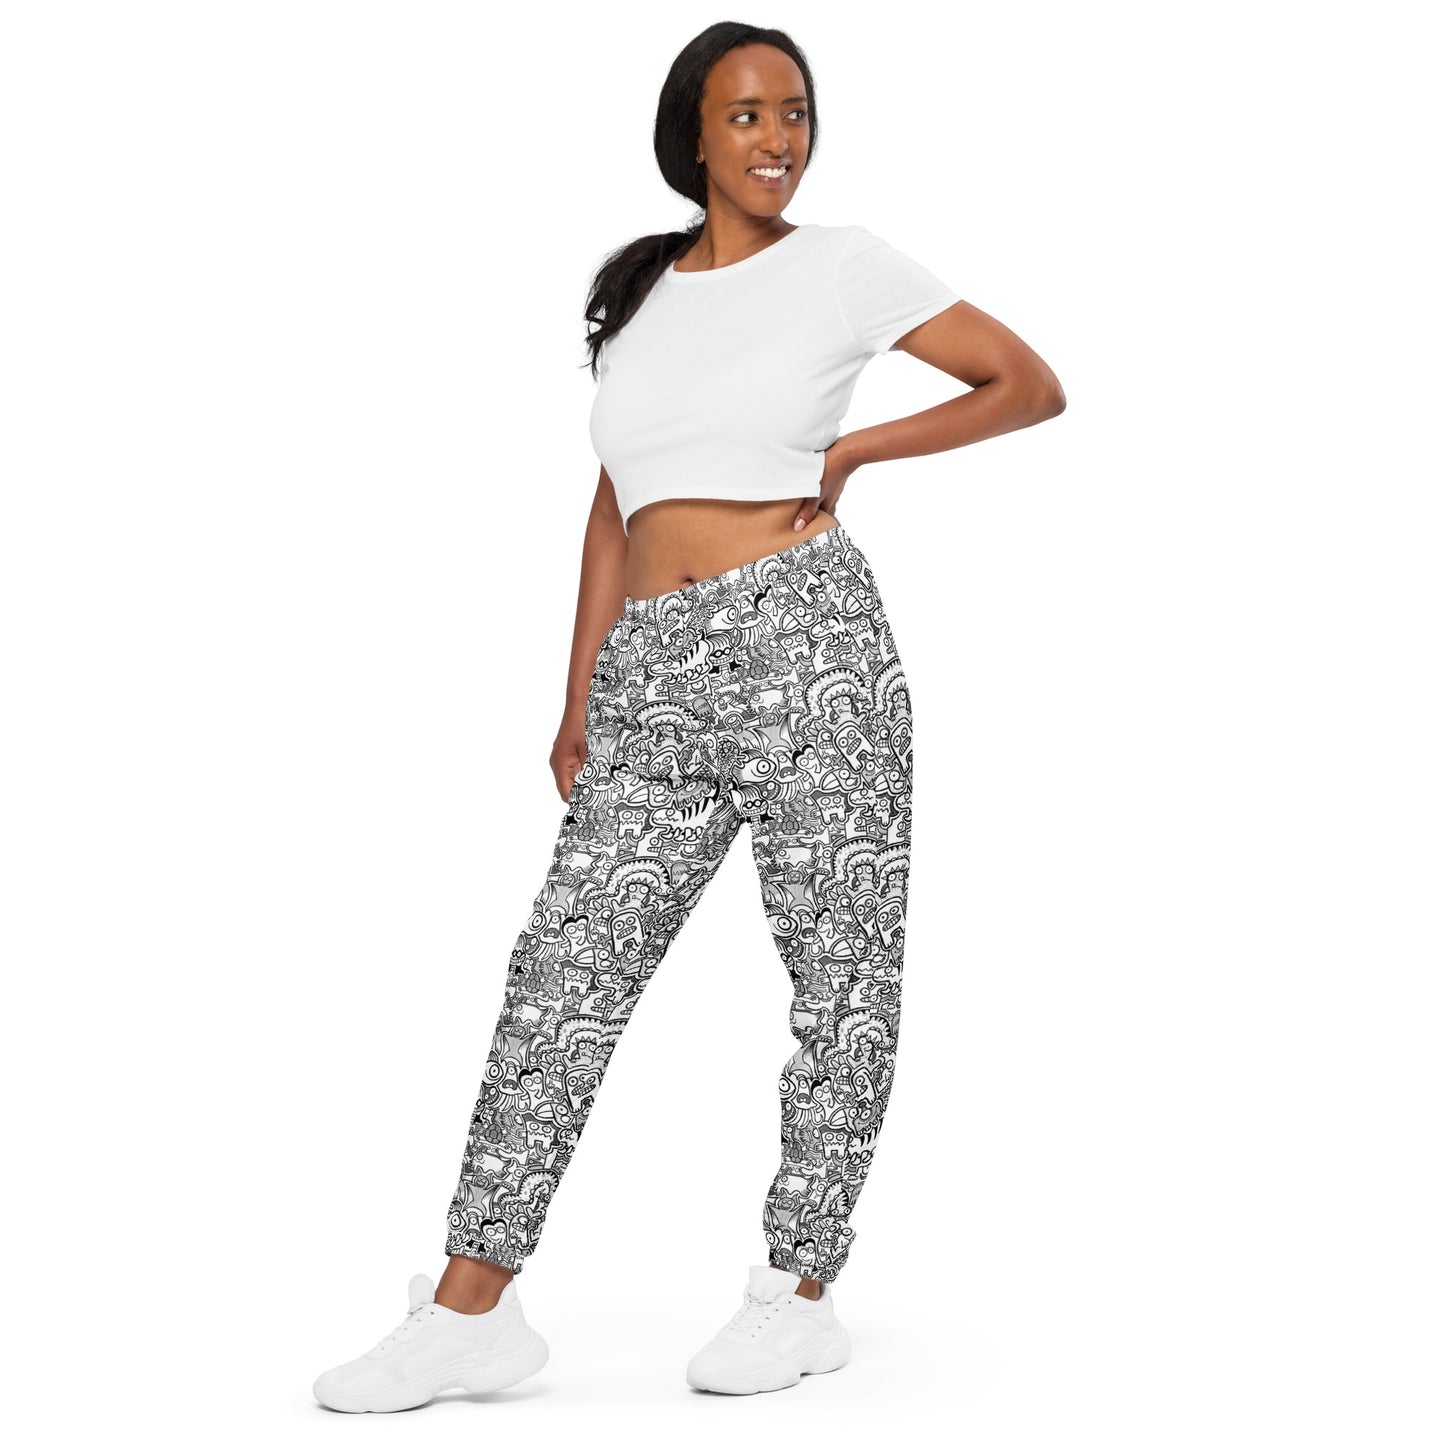 Fill your world with cool doodles Unisex track pants